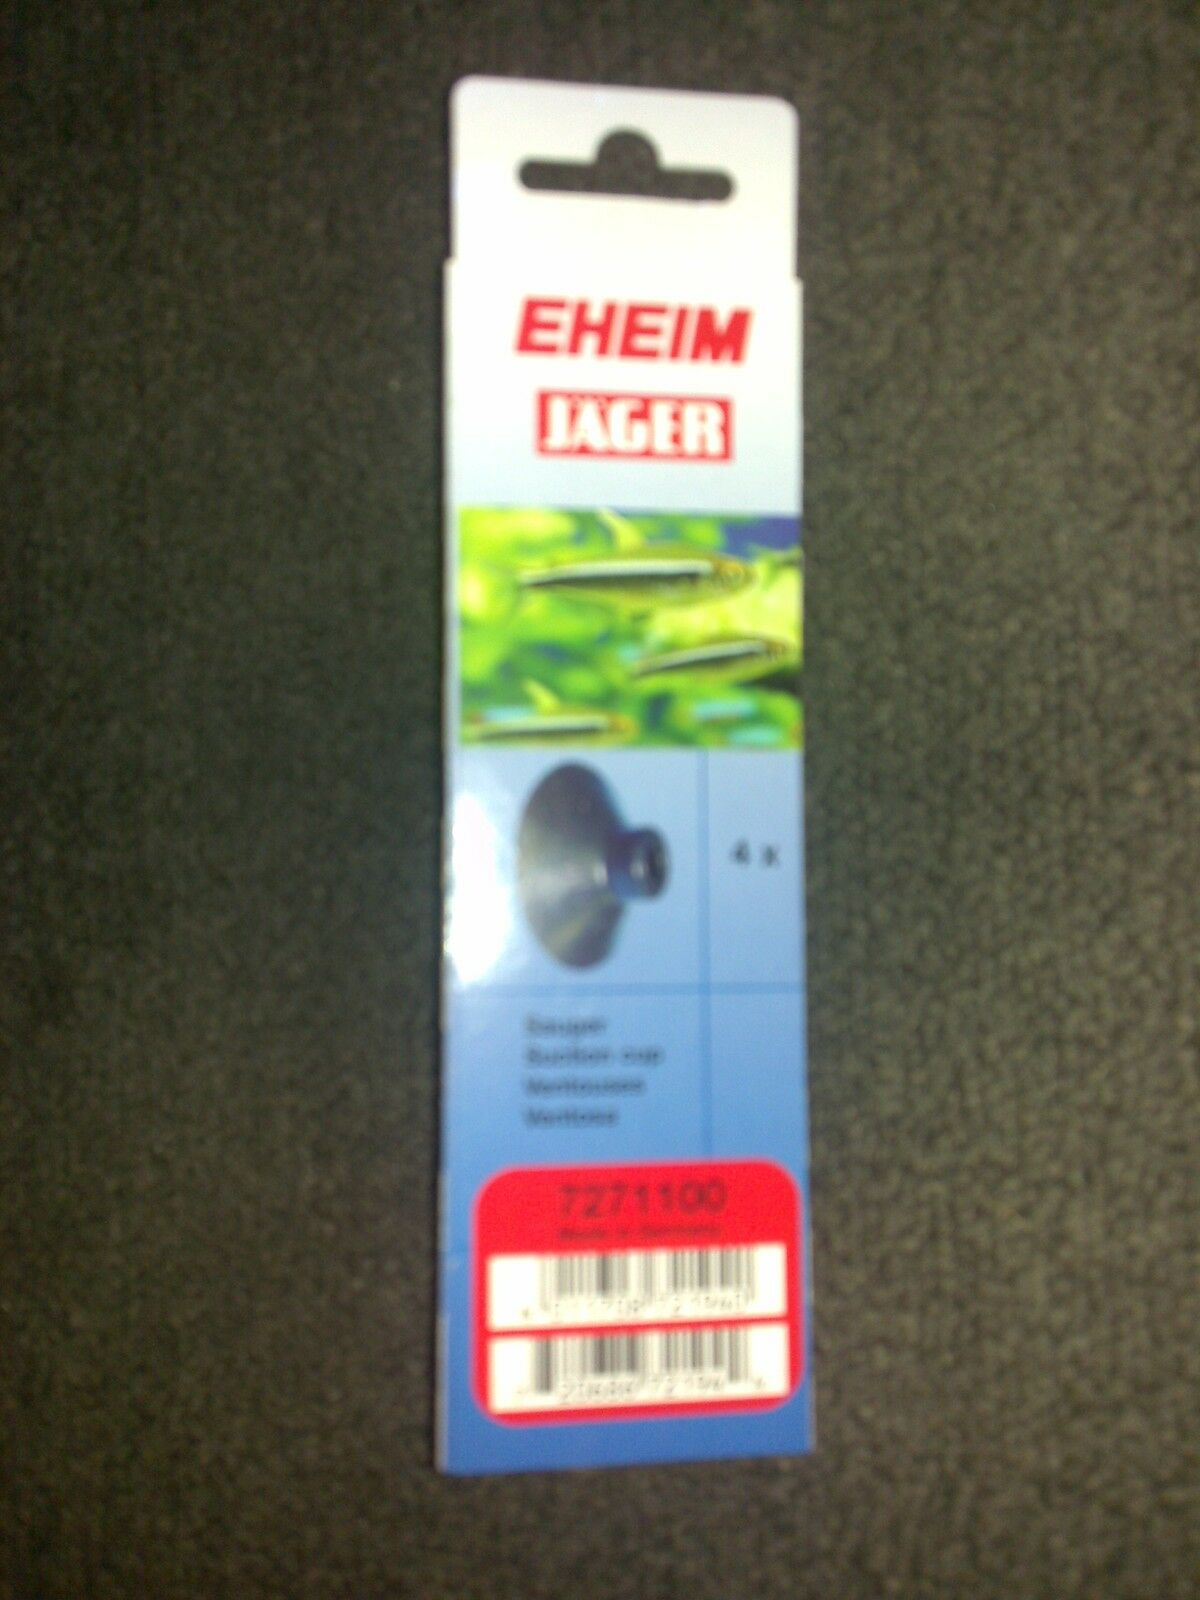 New Eheim suction cups 7271100, Suits most Eheim model Filters and heaters